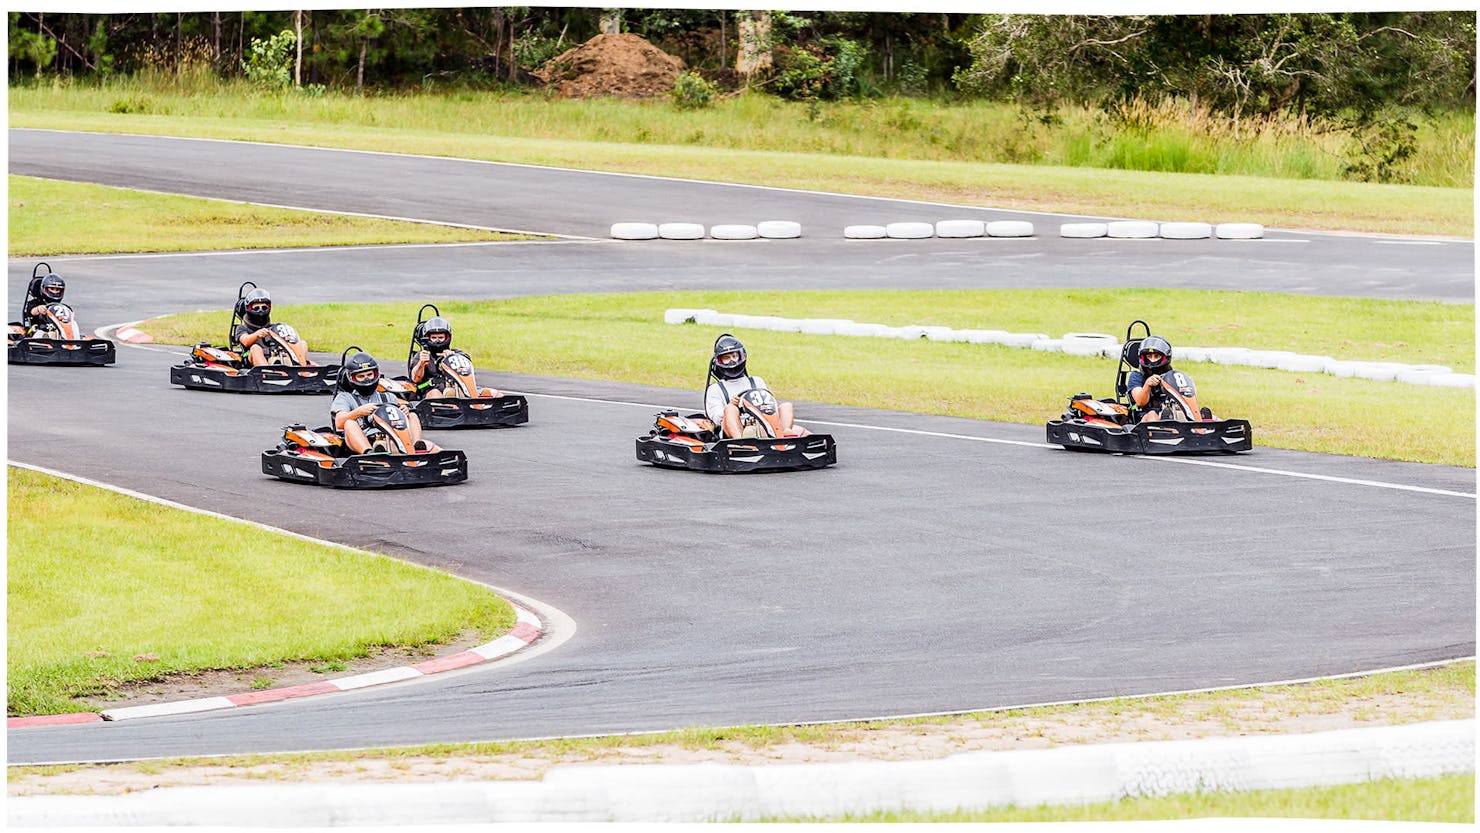 Experience adrenalin-fuelled fun at Go Kart Track!